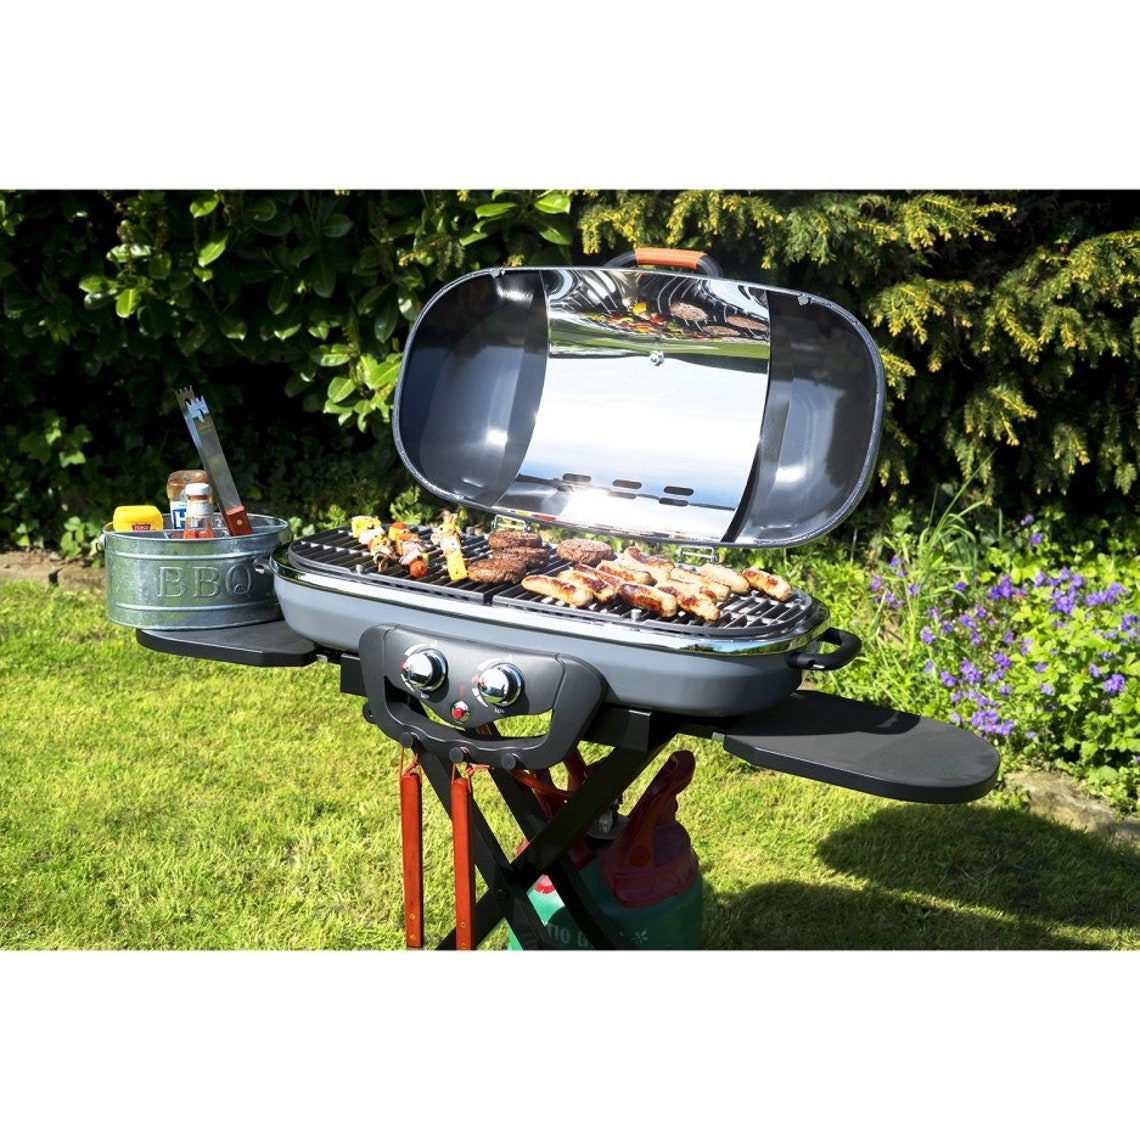 BBQ Grill Deluxe Portable Gas With Trolley Boss Outdoors - Il 1140xN.3235303994 B2lp